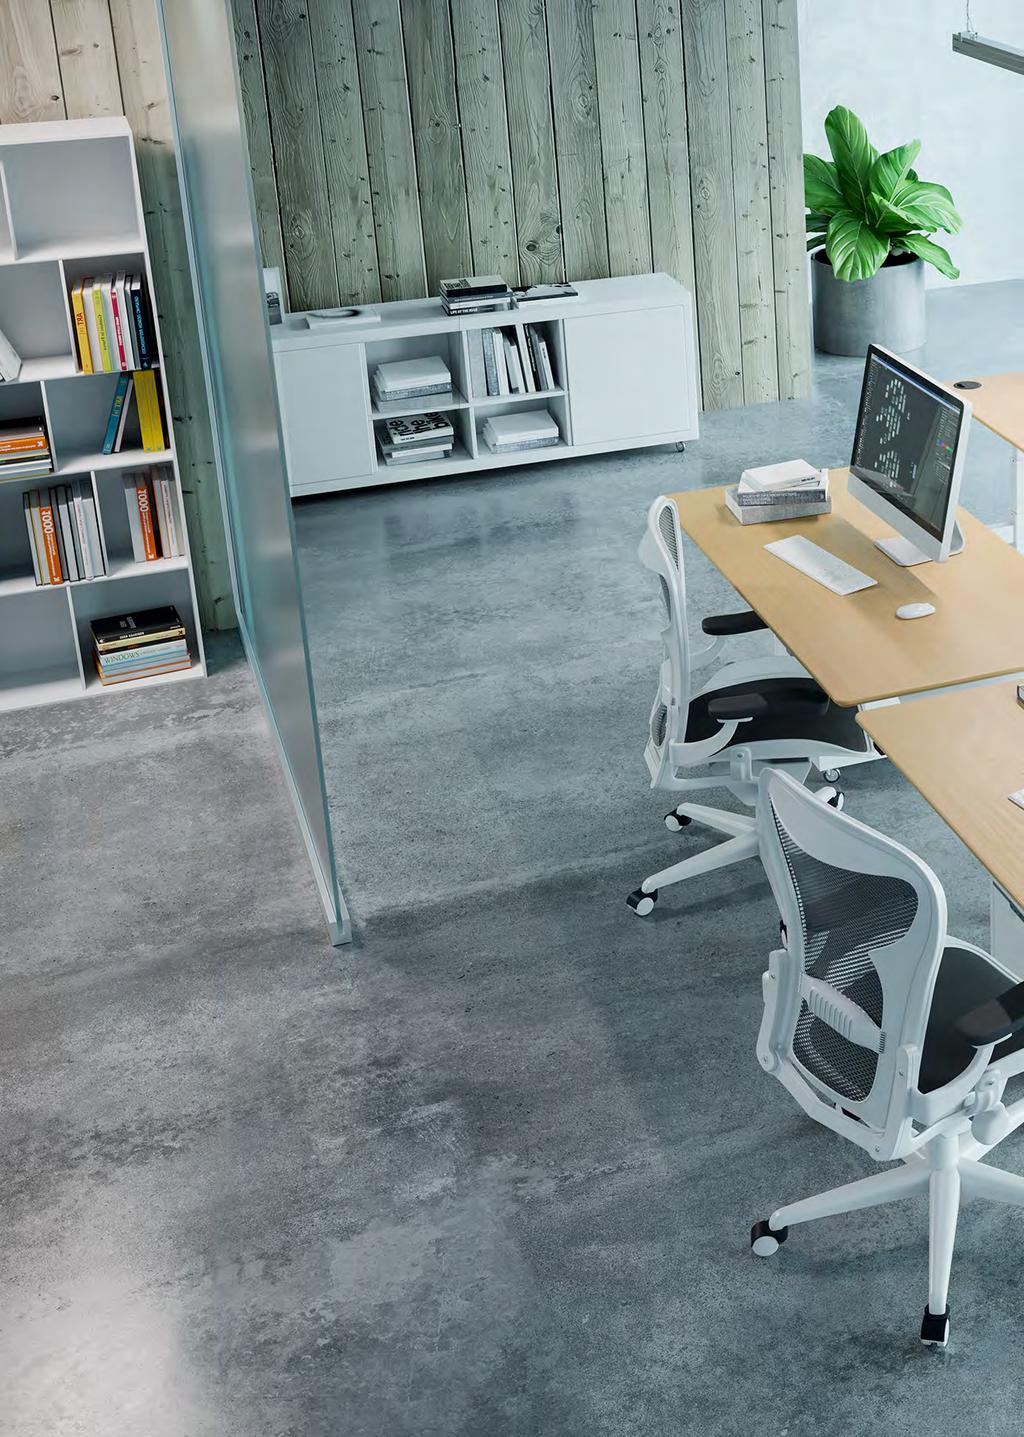 501-88 501-88 Functionality and modern design The bench 501-88 is very suitable for large office environments and the design makes it easy to separate the desks from each other with a partition